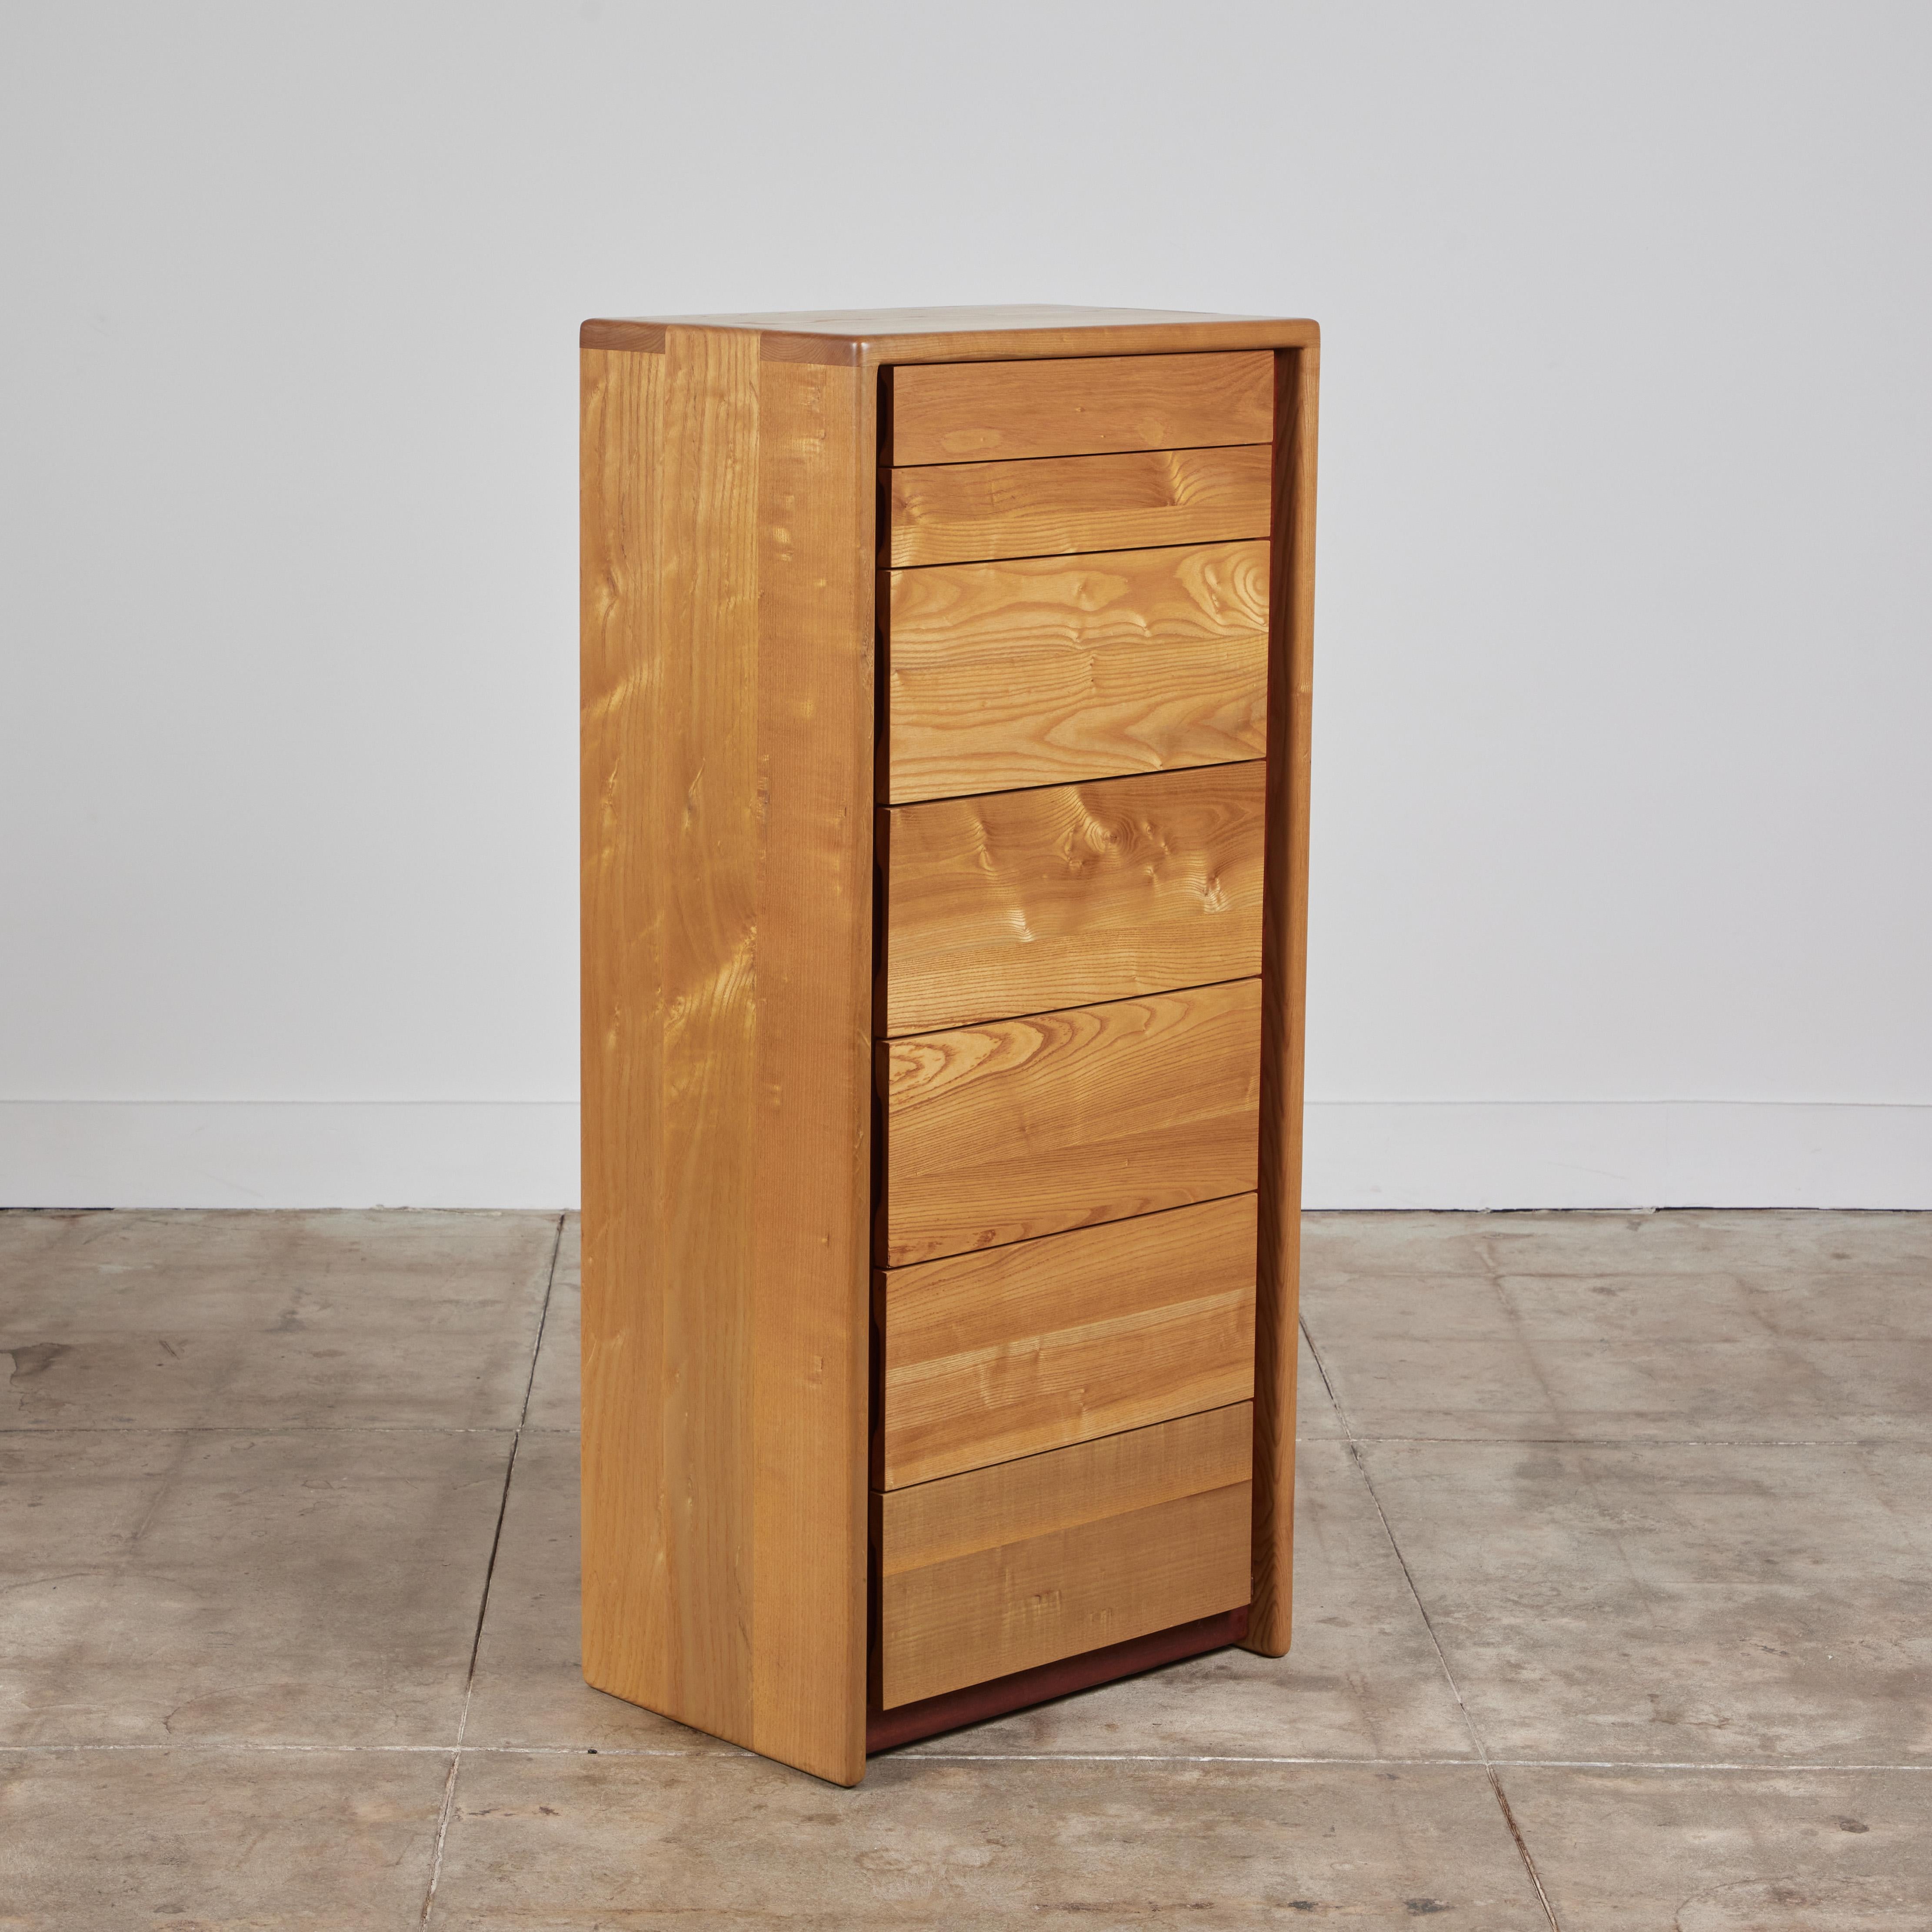 Dresser by Gerald McCabe for Eon Furniture, c.1997, USA. The maple dresser, features soft rounded edges with finger joinery detailing at the edges. The seven flat front drawers feature maple drawer fronts. This piece is stamped - Hand Crafted by